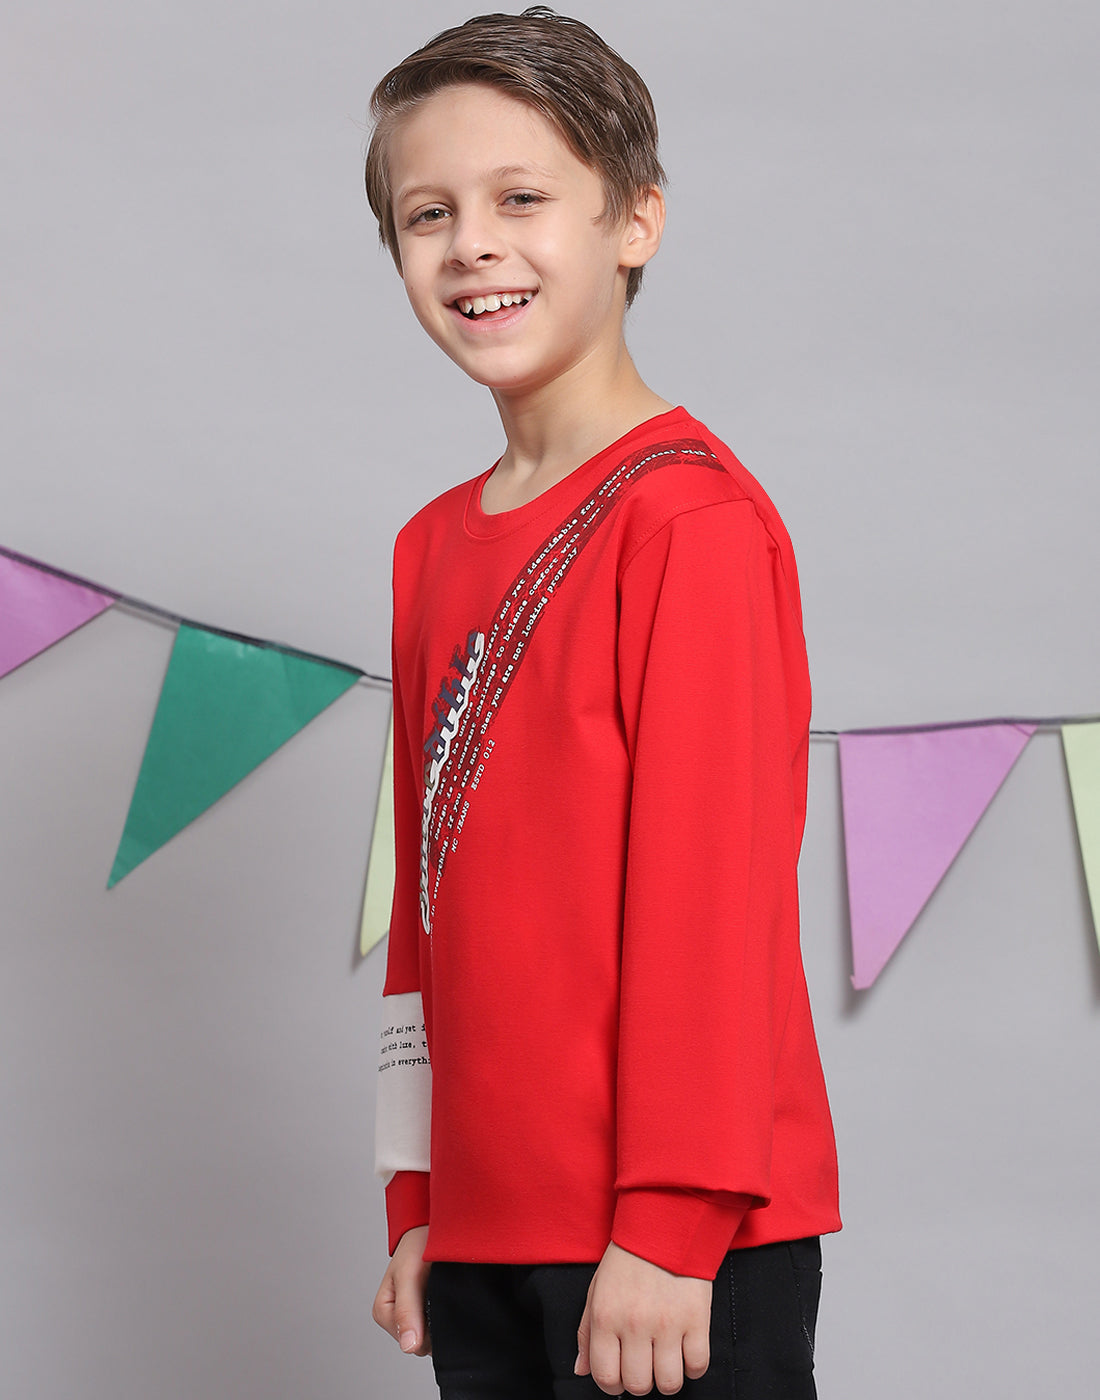 Boys Red Printed Round Neck Full Sleeve T-Shirts